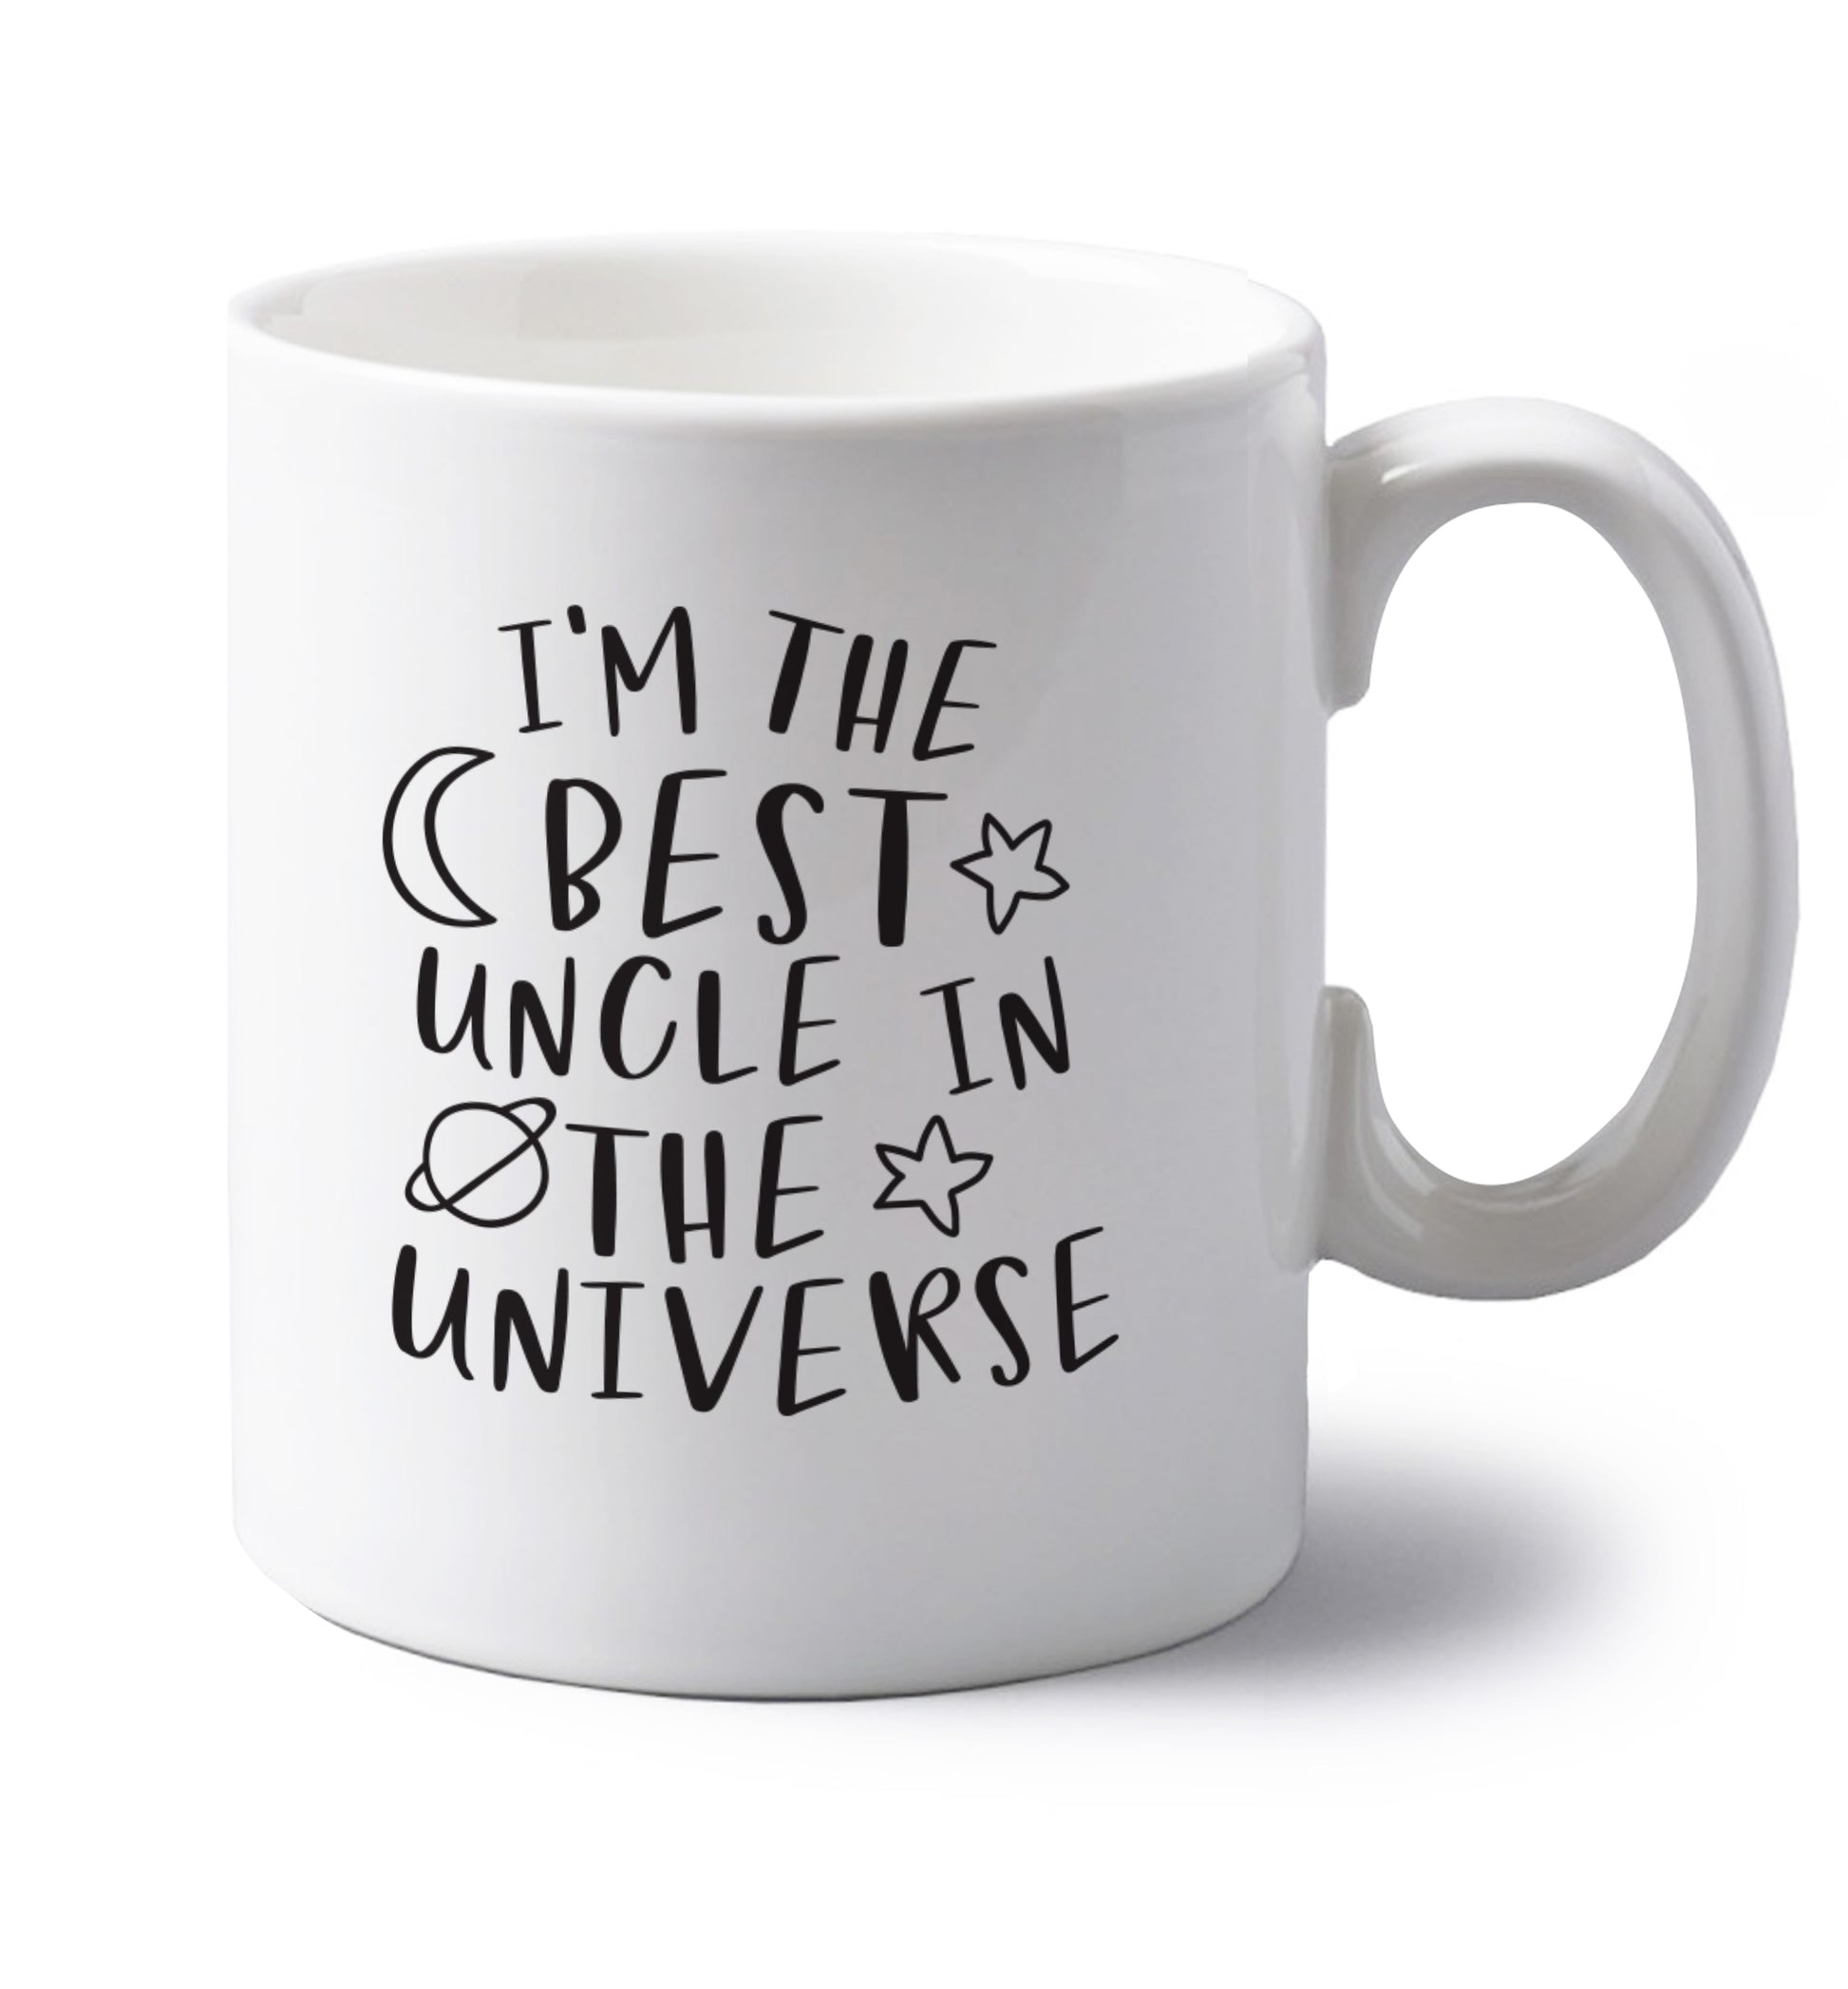 I'm the best uncle in the universe left handed white ceramic mug 